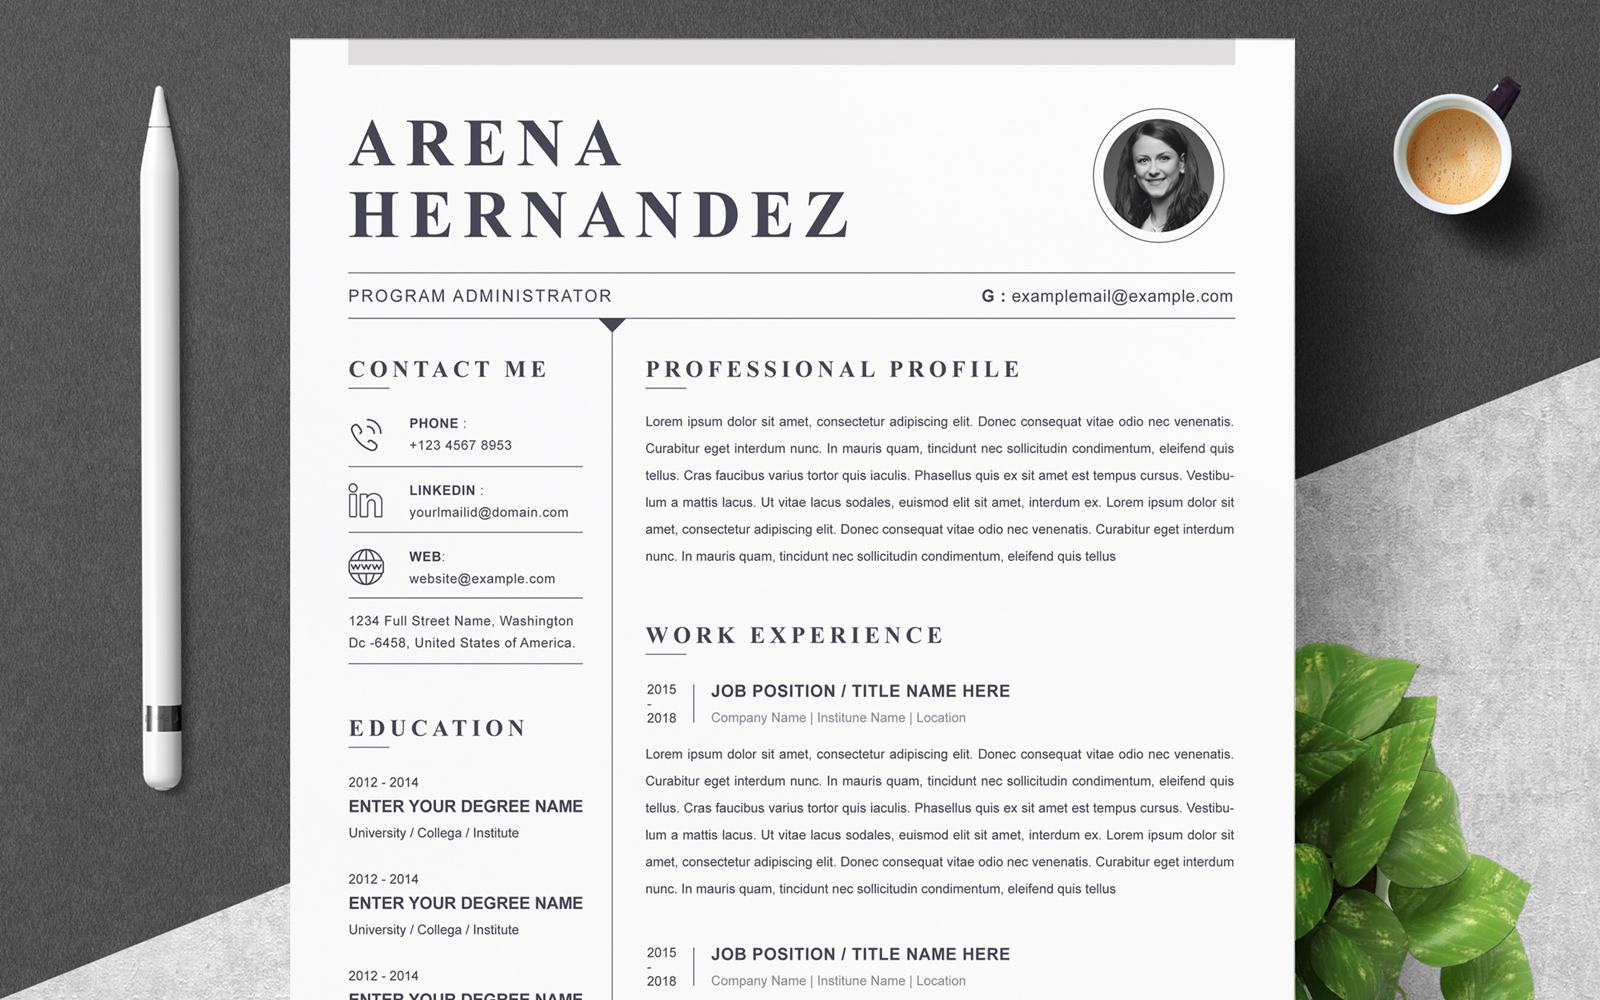 Template #221878 Resume Template Webdesign Template - Logo template Preview